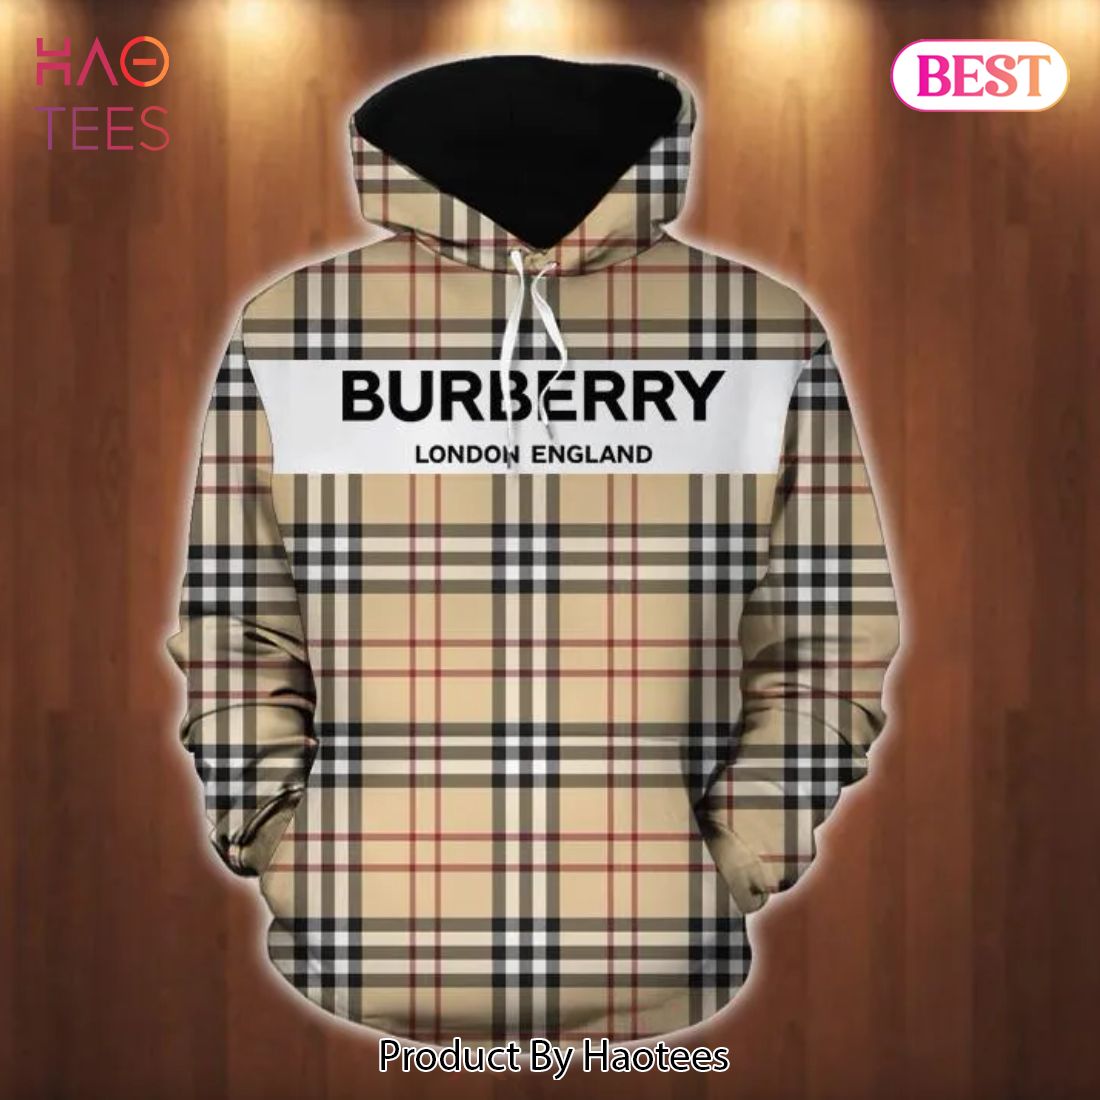 Burberry Unisex Hoodie For Men Women Luxury Brand Clothing Clothes Outfit